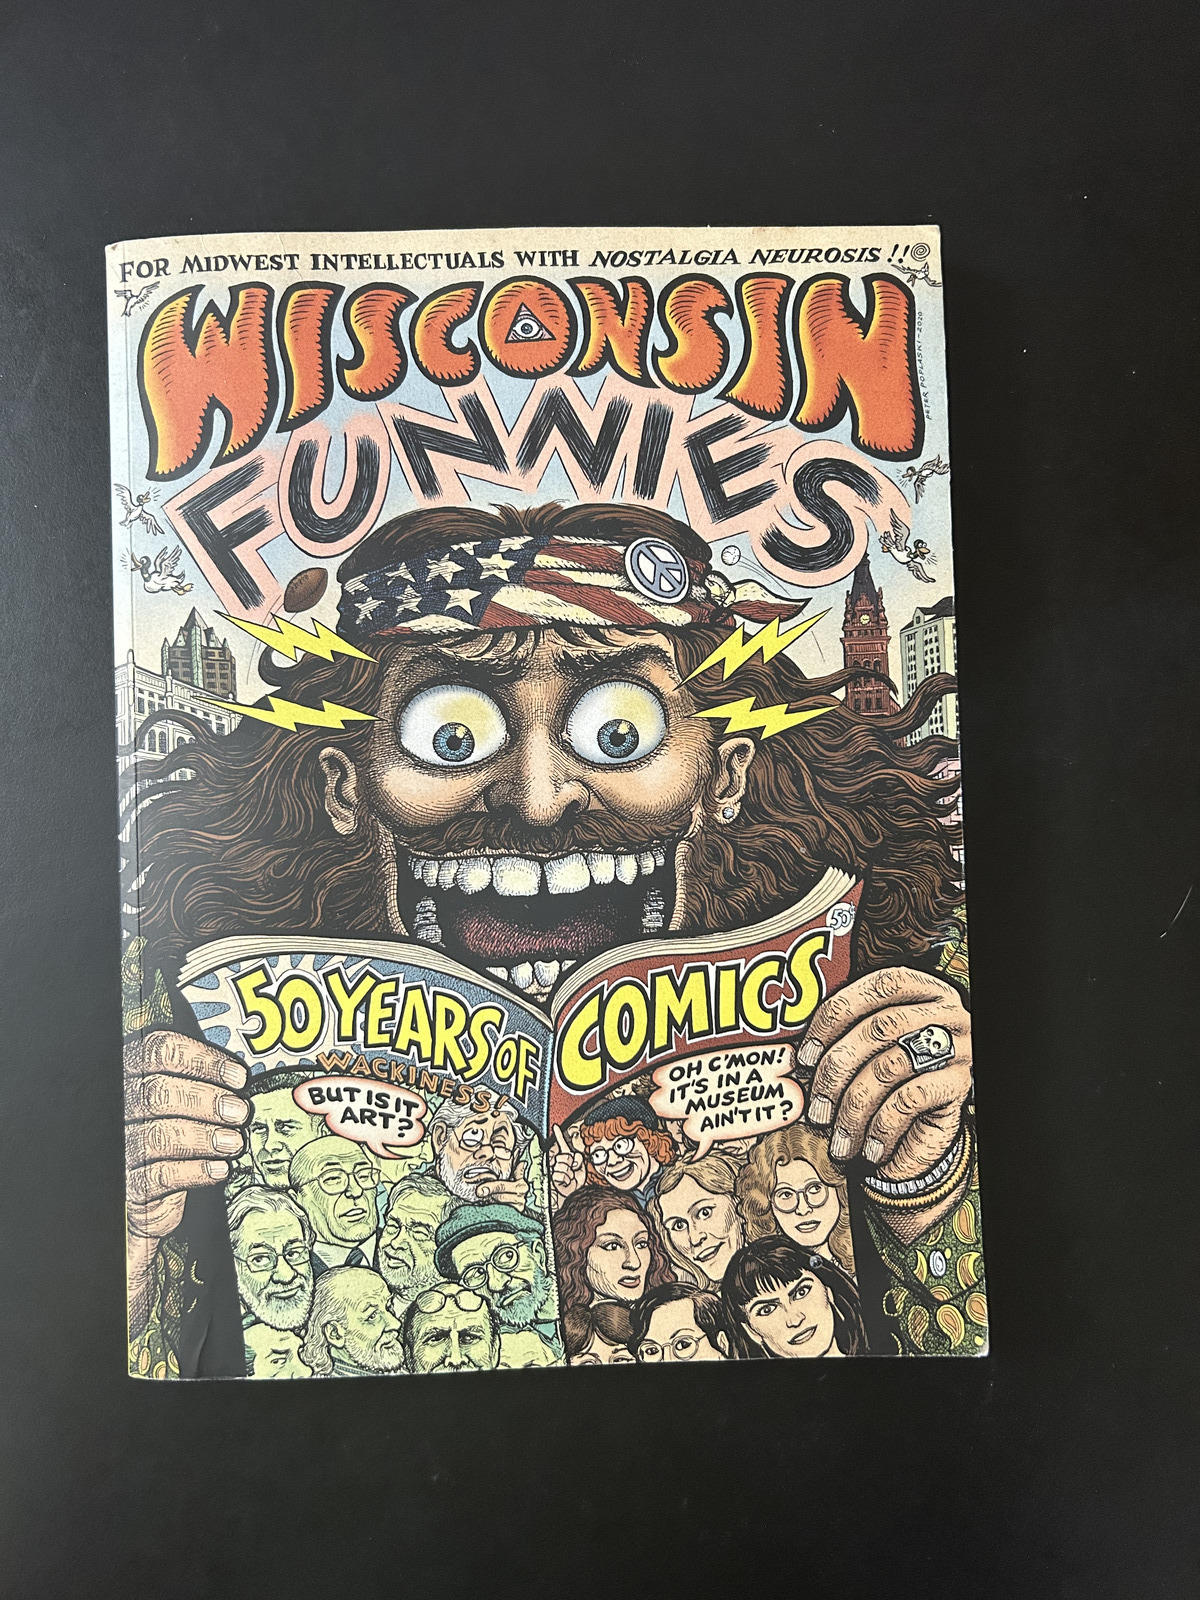 Wisconsin Funnies 50 Years of Comics Museum of Wisconsin Art Book Extremely Rare